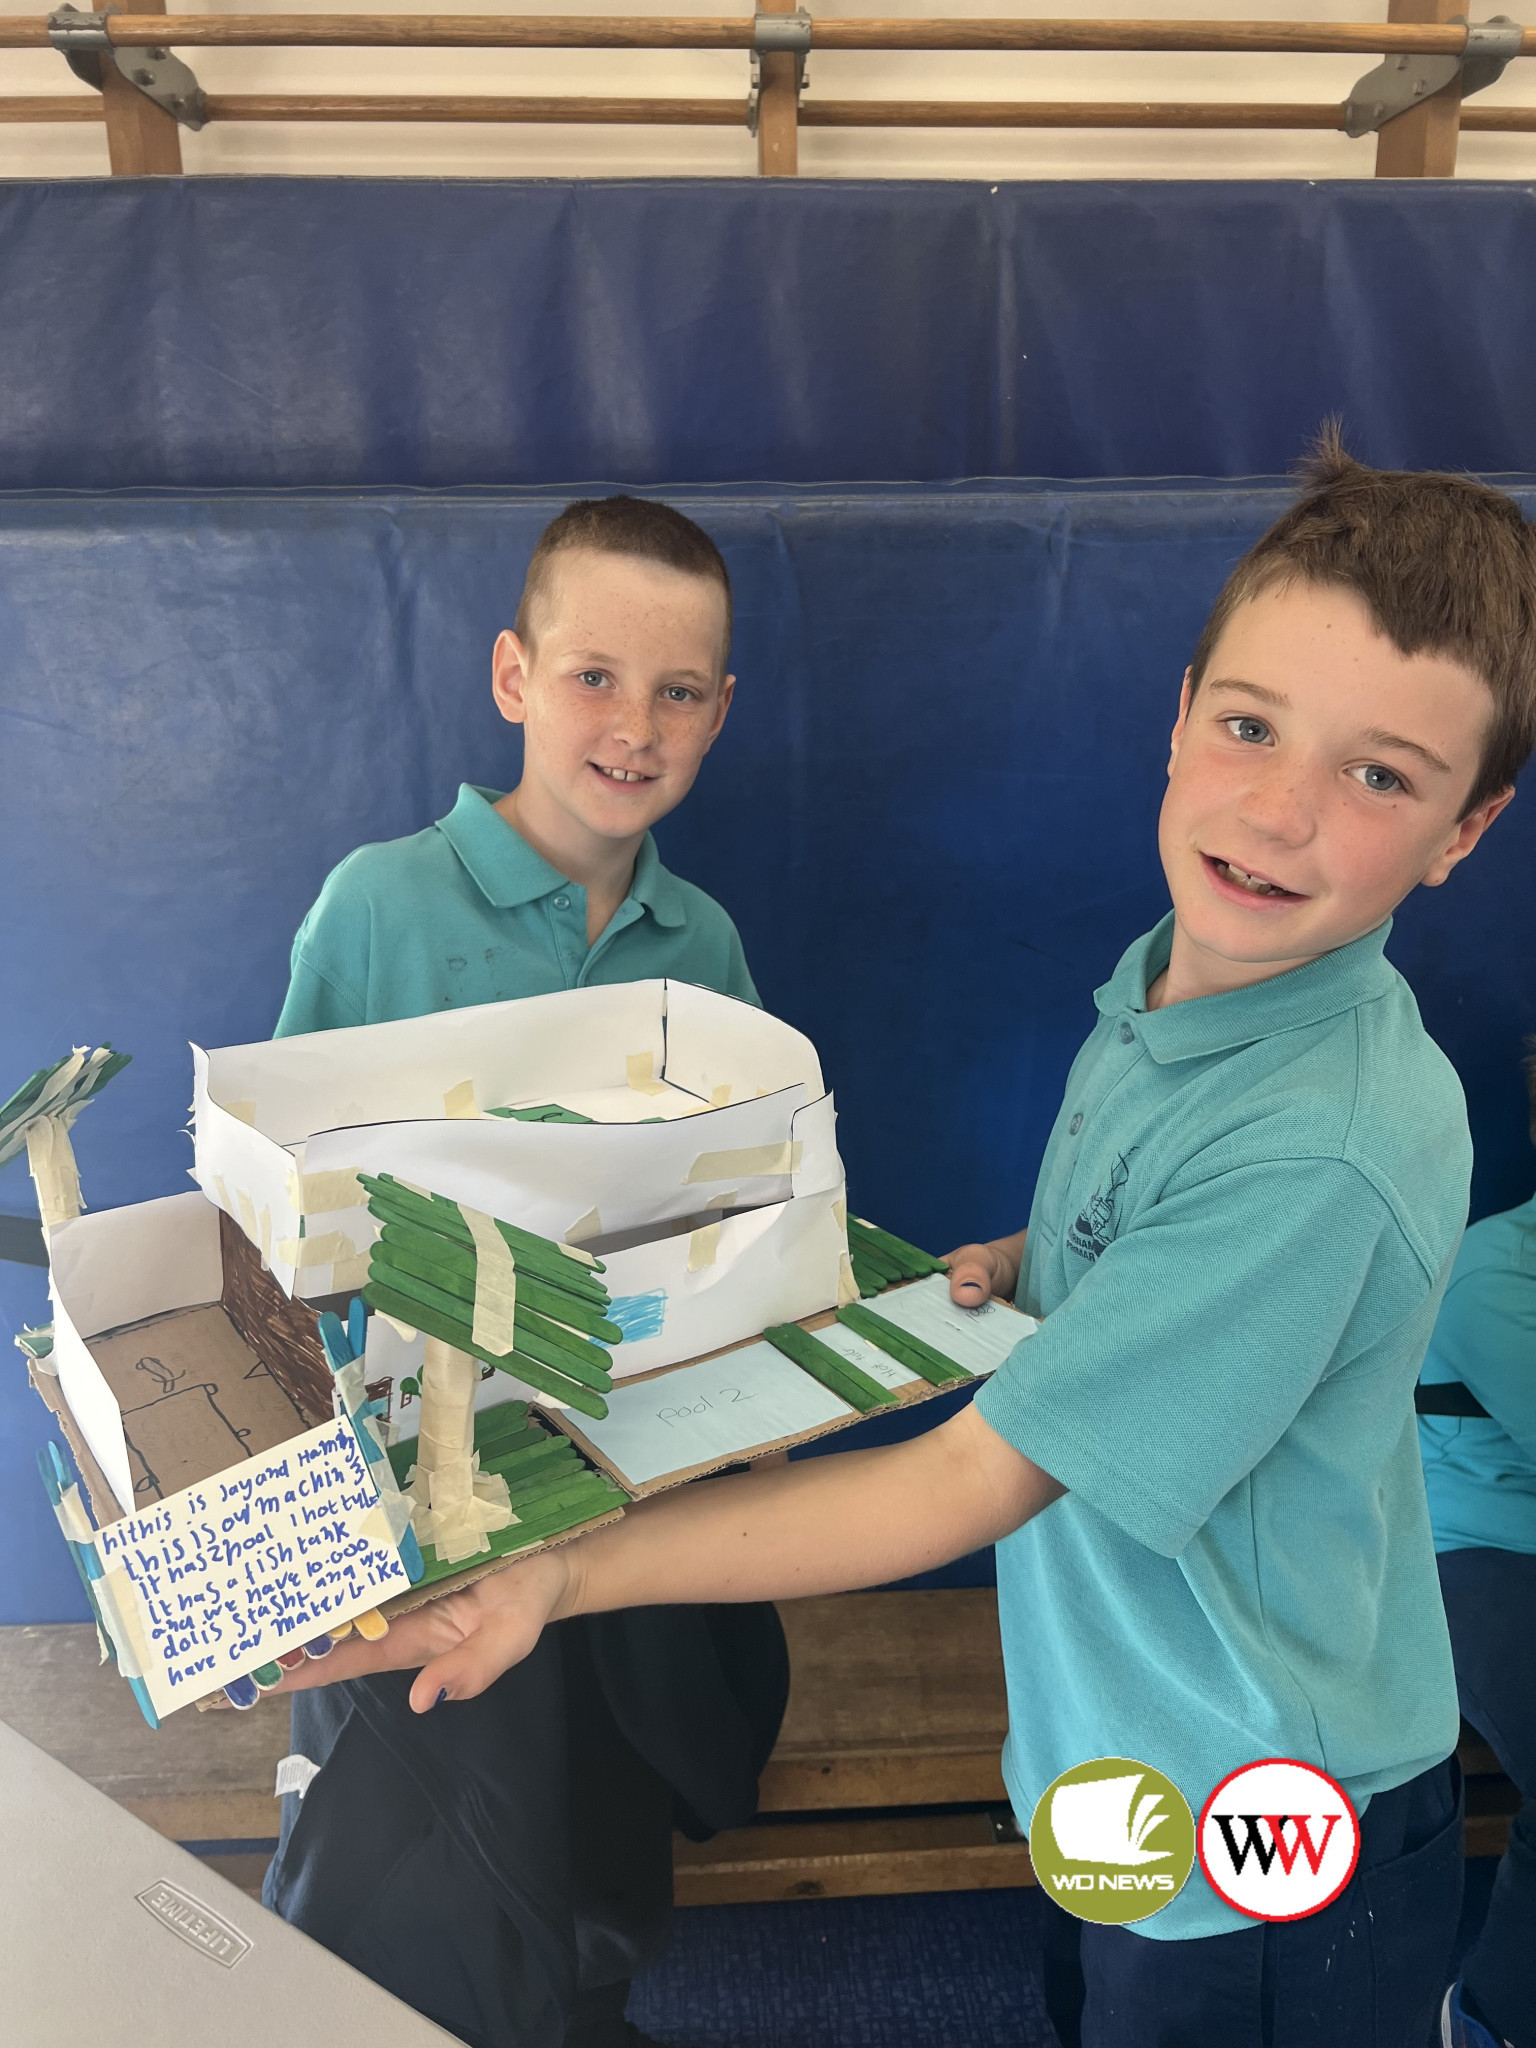 Jay Cowan and Hamish McColl with their finished design.